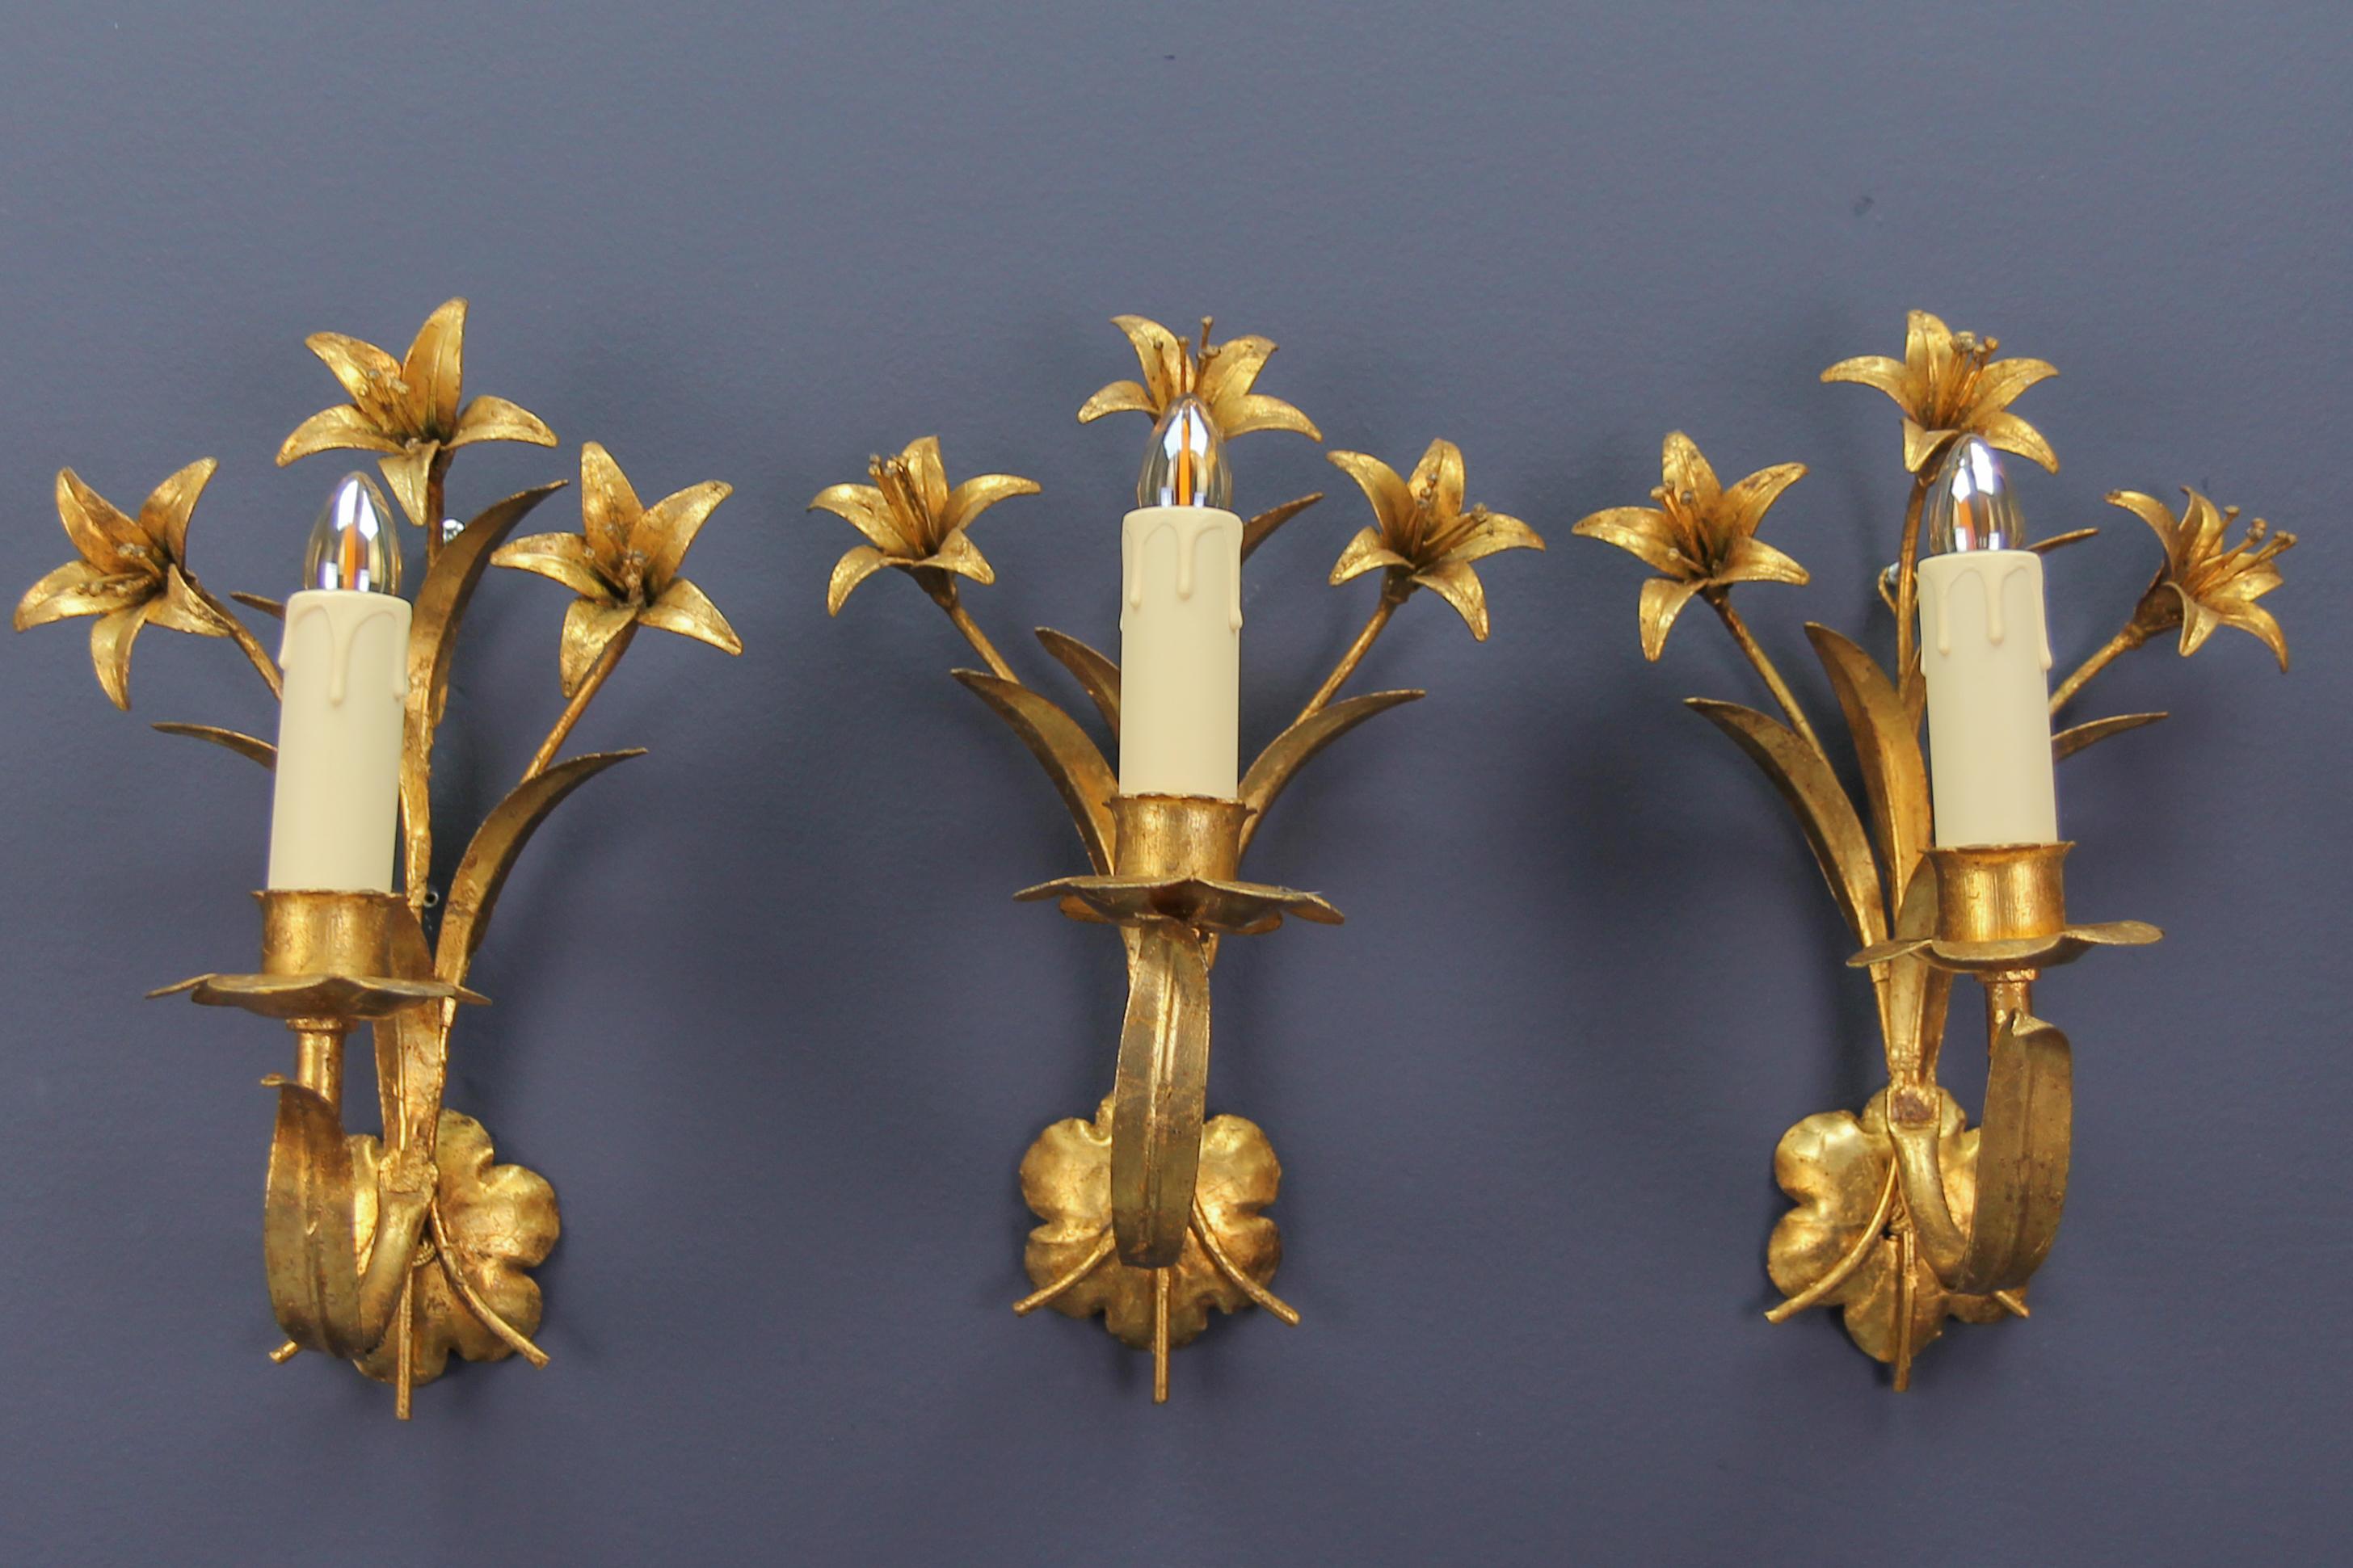 Hollywood Regency style French gilt metal lily flower wall sconces, set of three.
A beautiful set of three gilt metal wall lights in the shape of lilies. Each sconce has one arm with a socket for an E14 size light bulb and three flowers and leaves